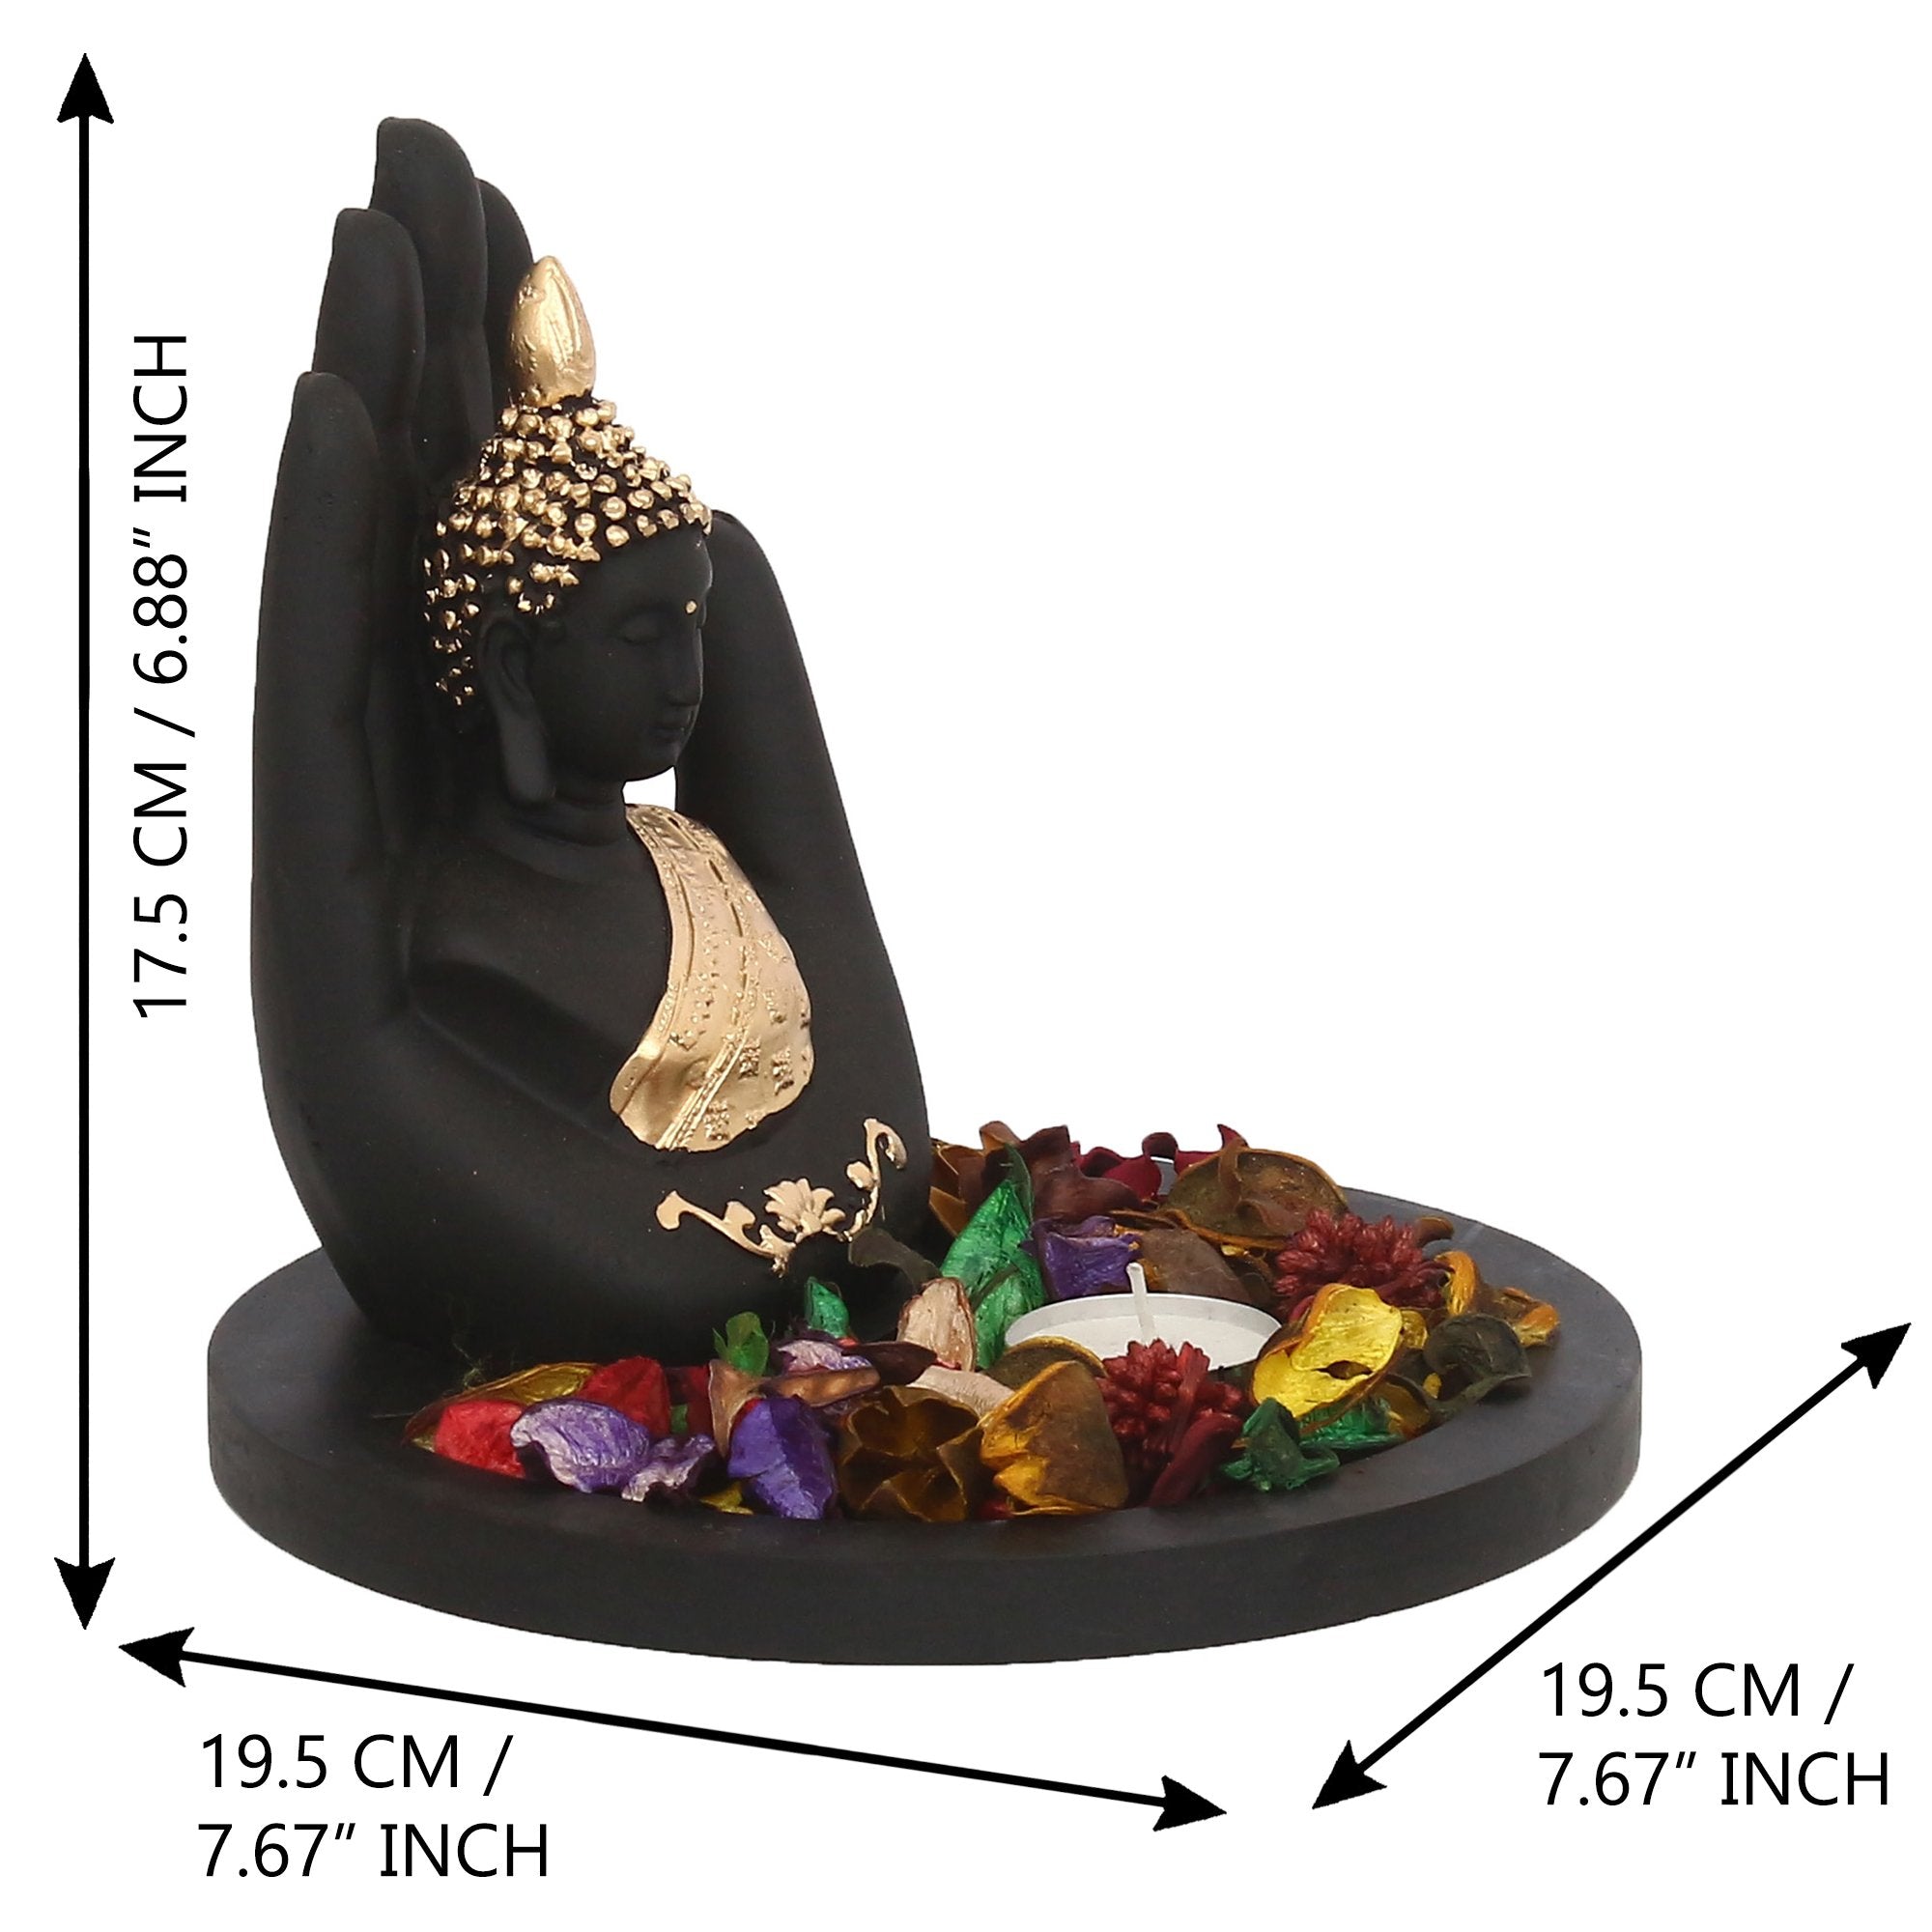 Designer Peacock Rakhi with Golden Handcrafted Palm Buddha Decorative Showpiece with Wooden Base, Fragranced Petals and Tealight and Roli Chawal Pack, Best Wishes Greeting Card 3